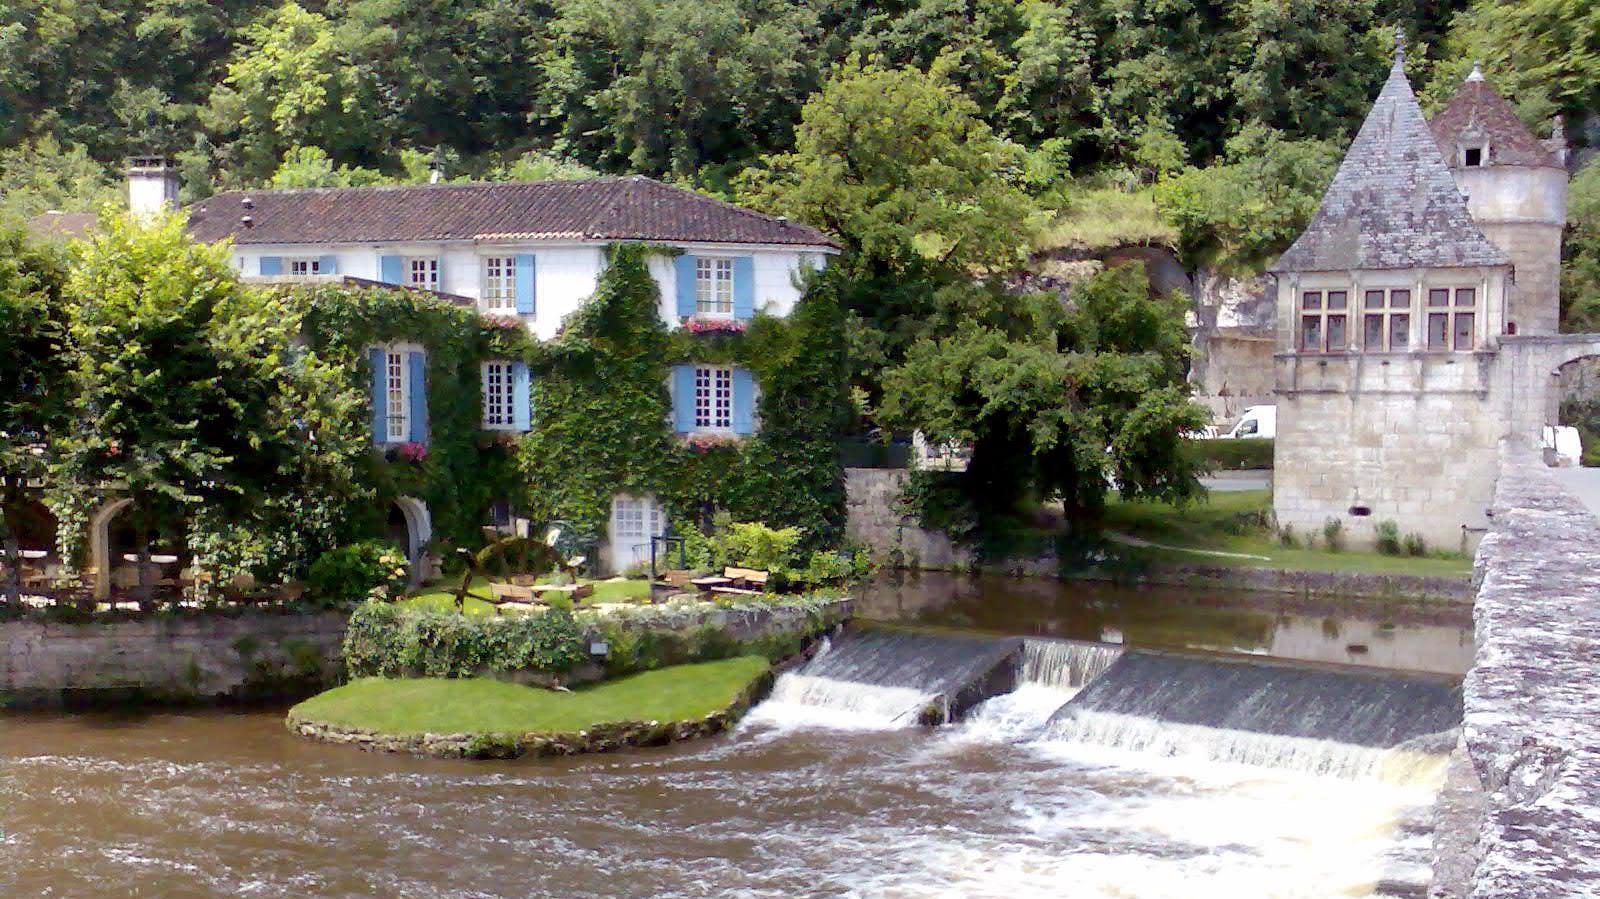 House on a river